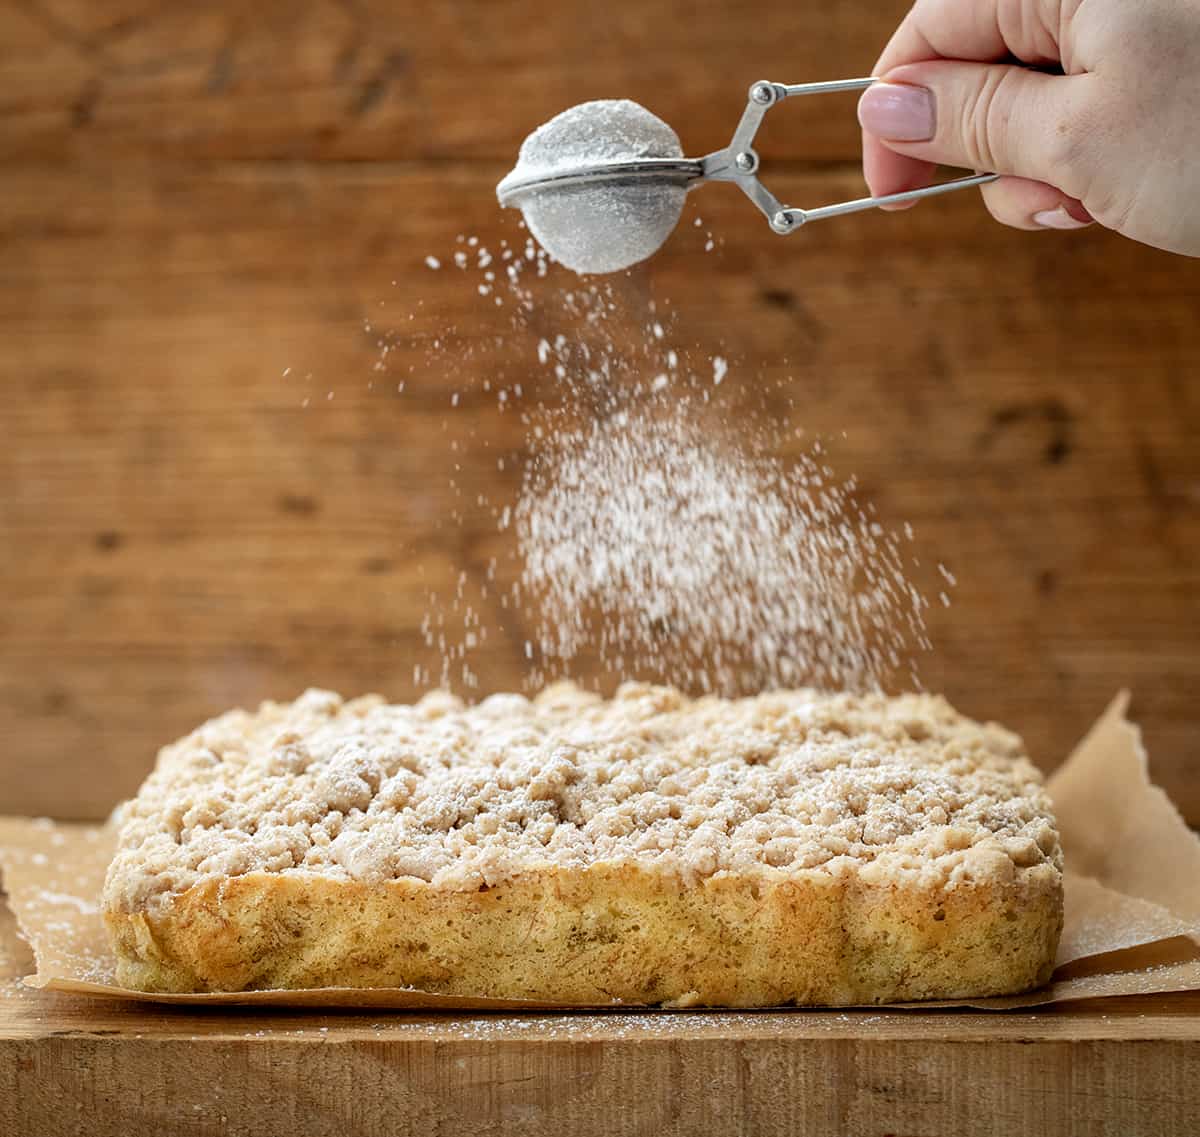 Dusting the top of a Banana Crumb Cake with confectioners sugar.